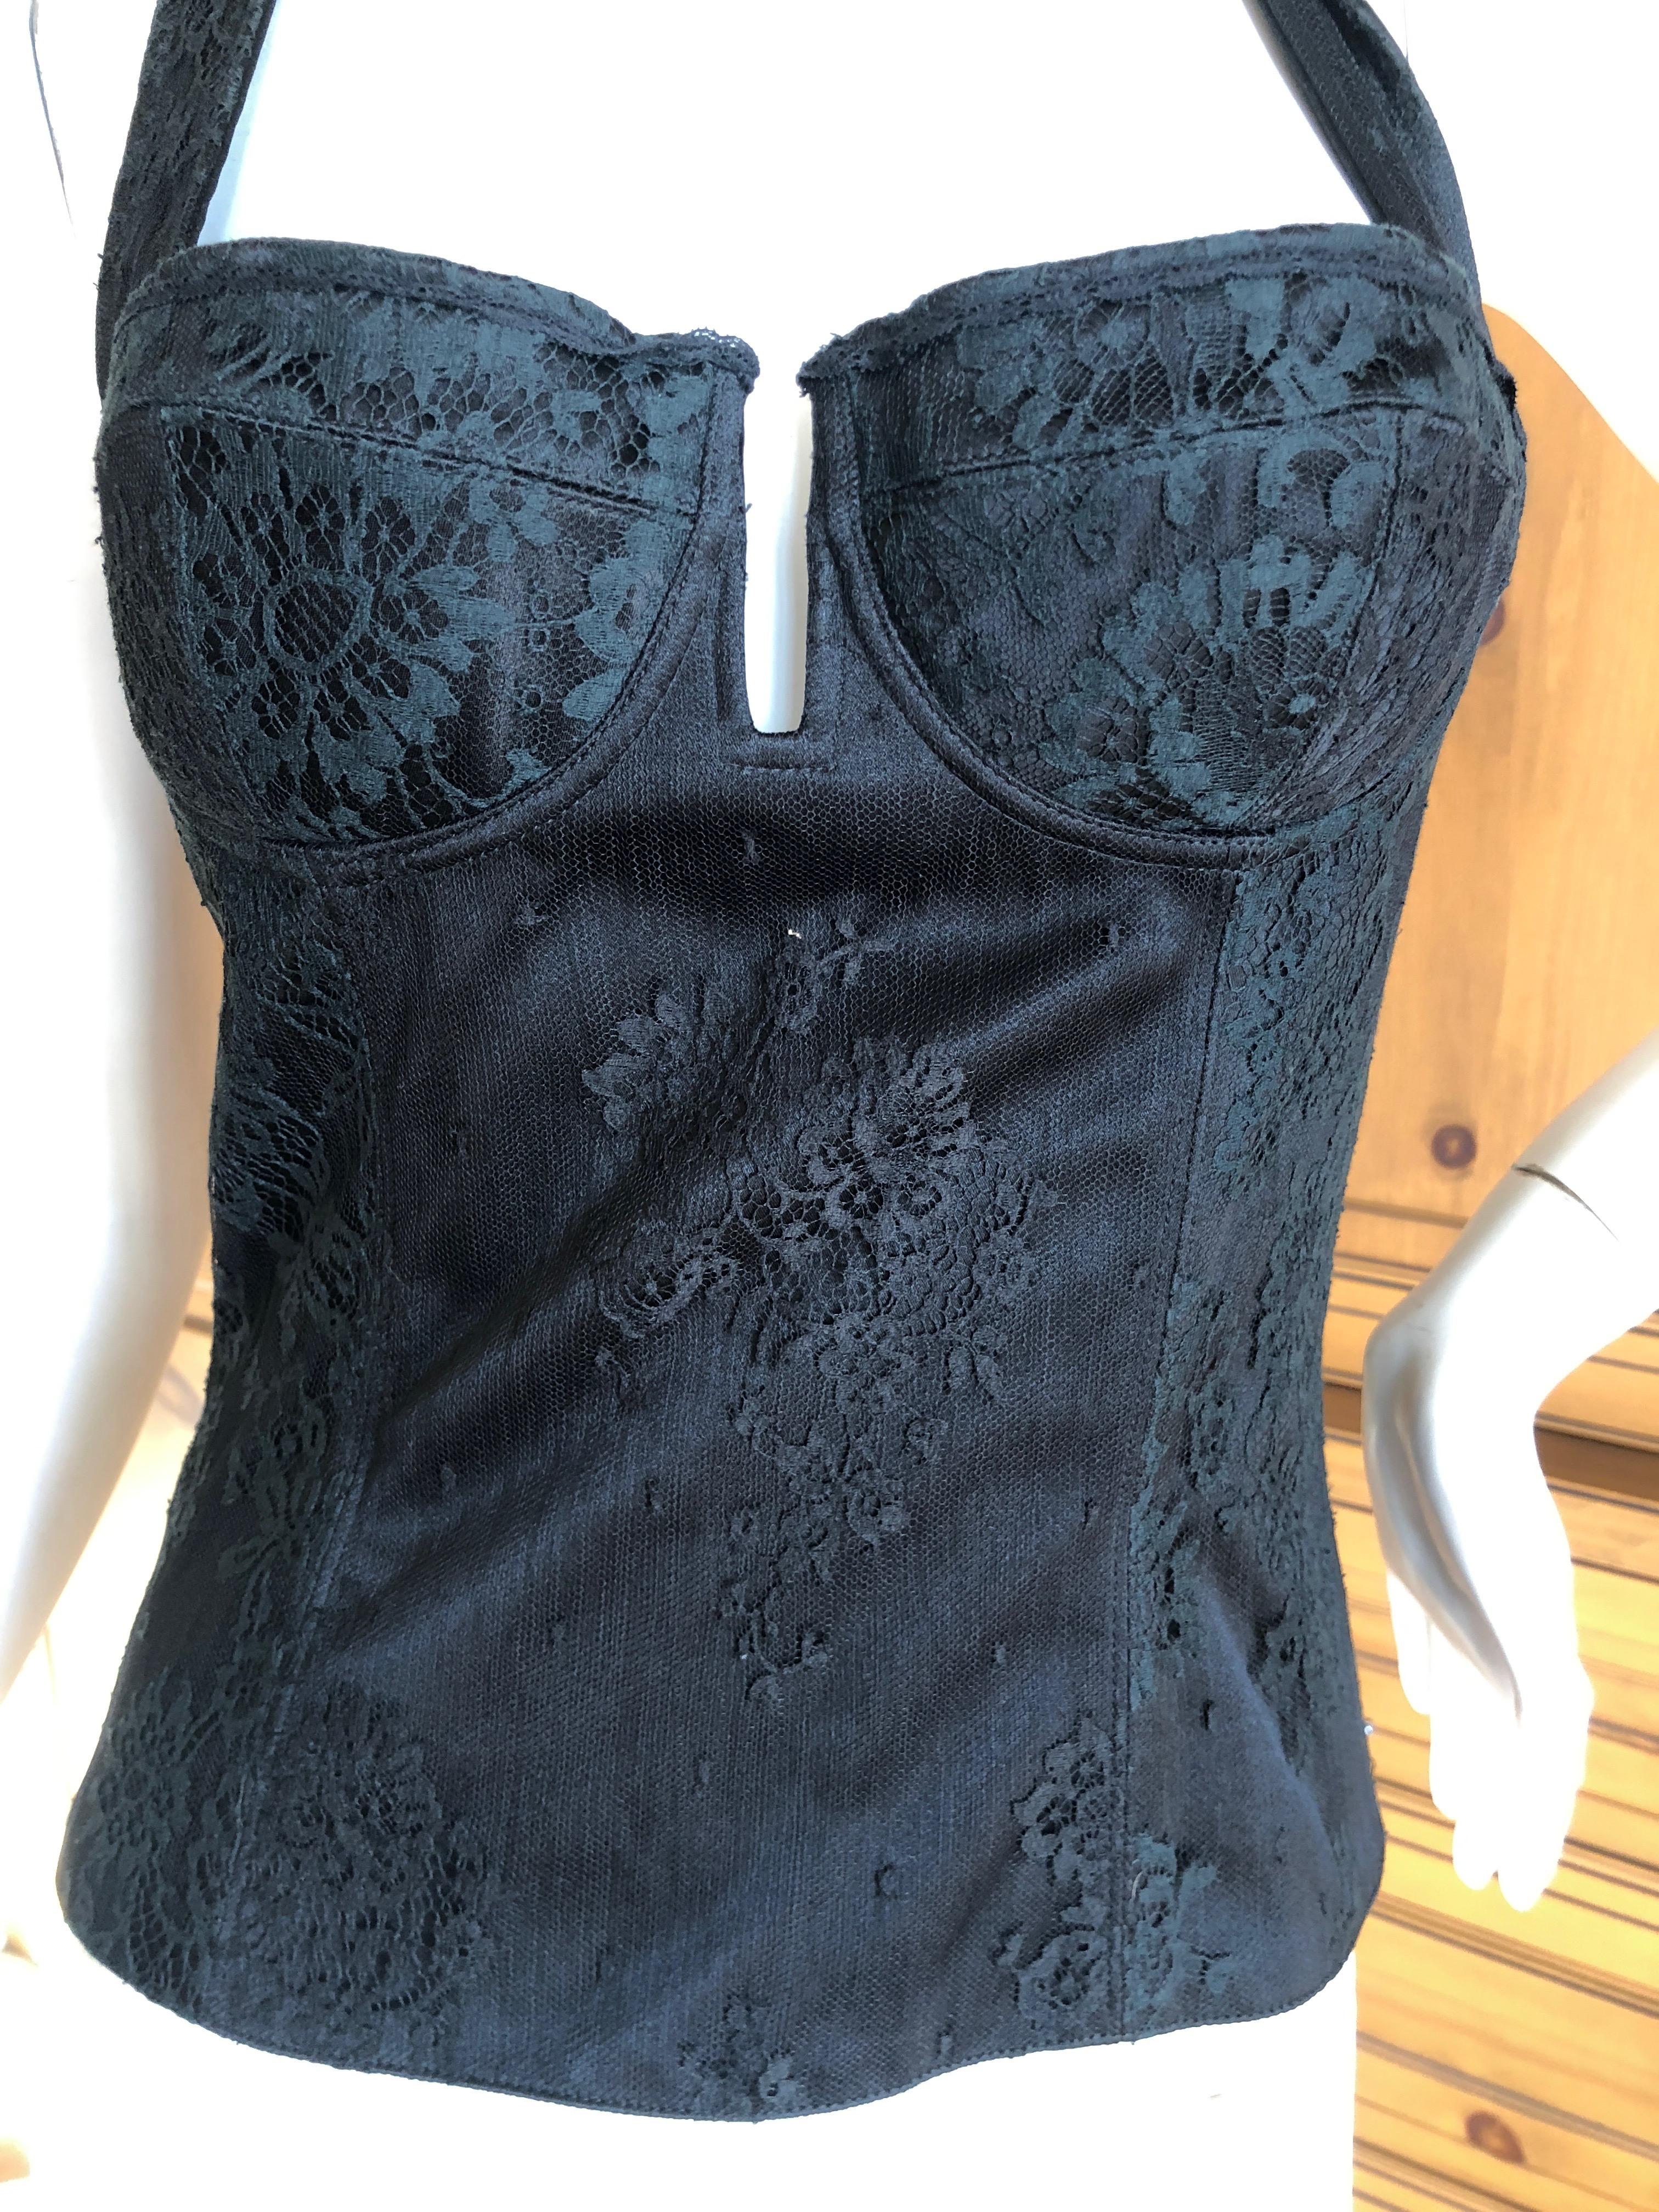 Wonderful vintage lace corset from Christian Dior by John Galliano
Marked size 38
Bust  34